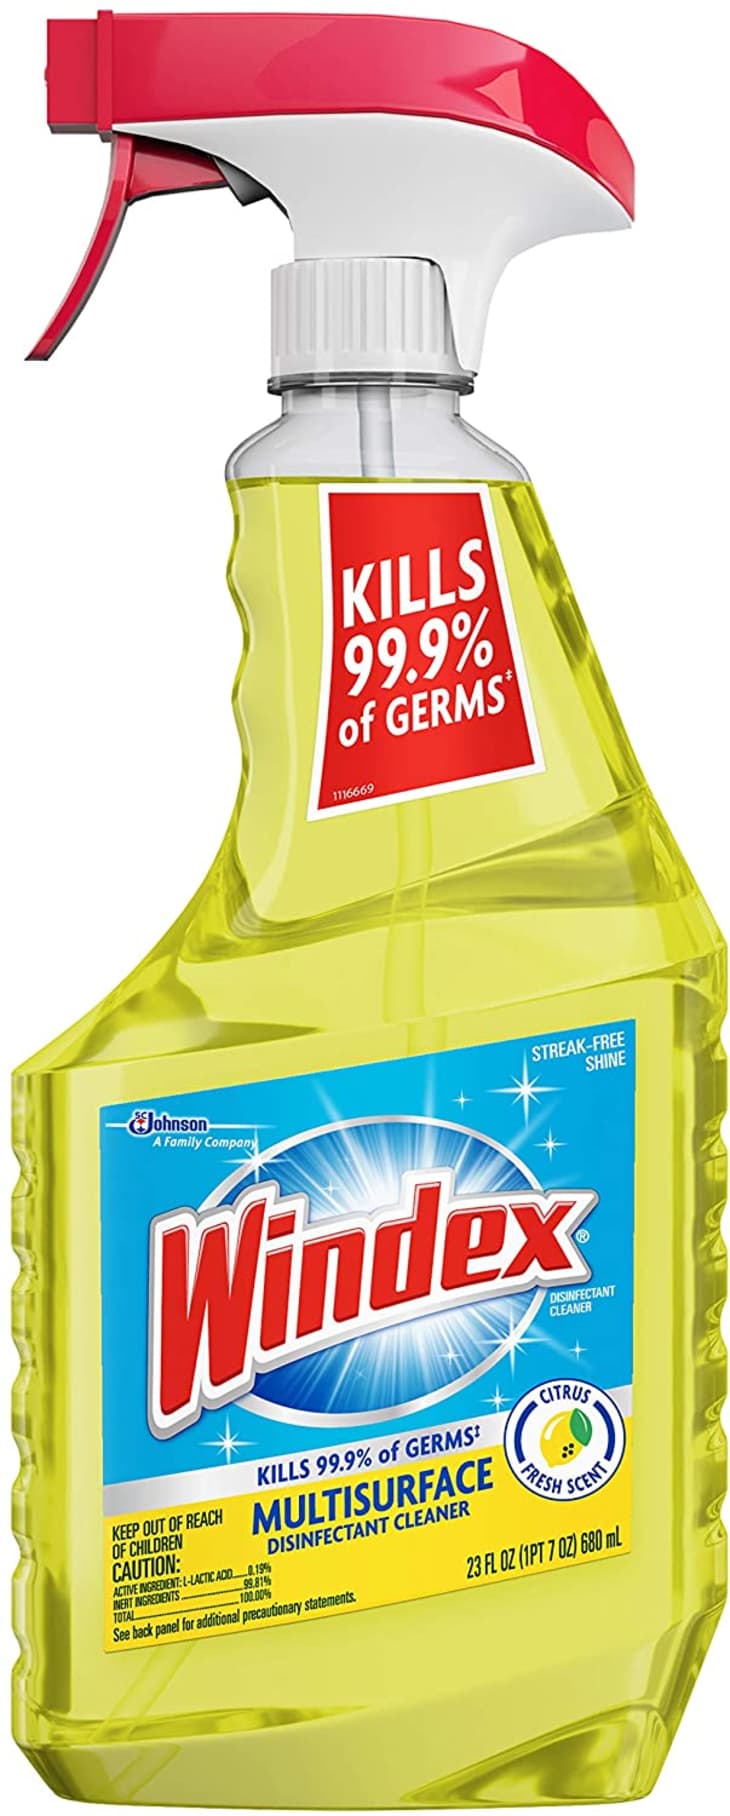 Windex Multisurface Cleaner and Disinfectant Spray at Amazon